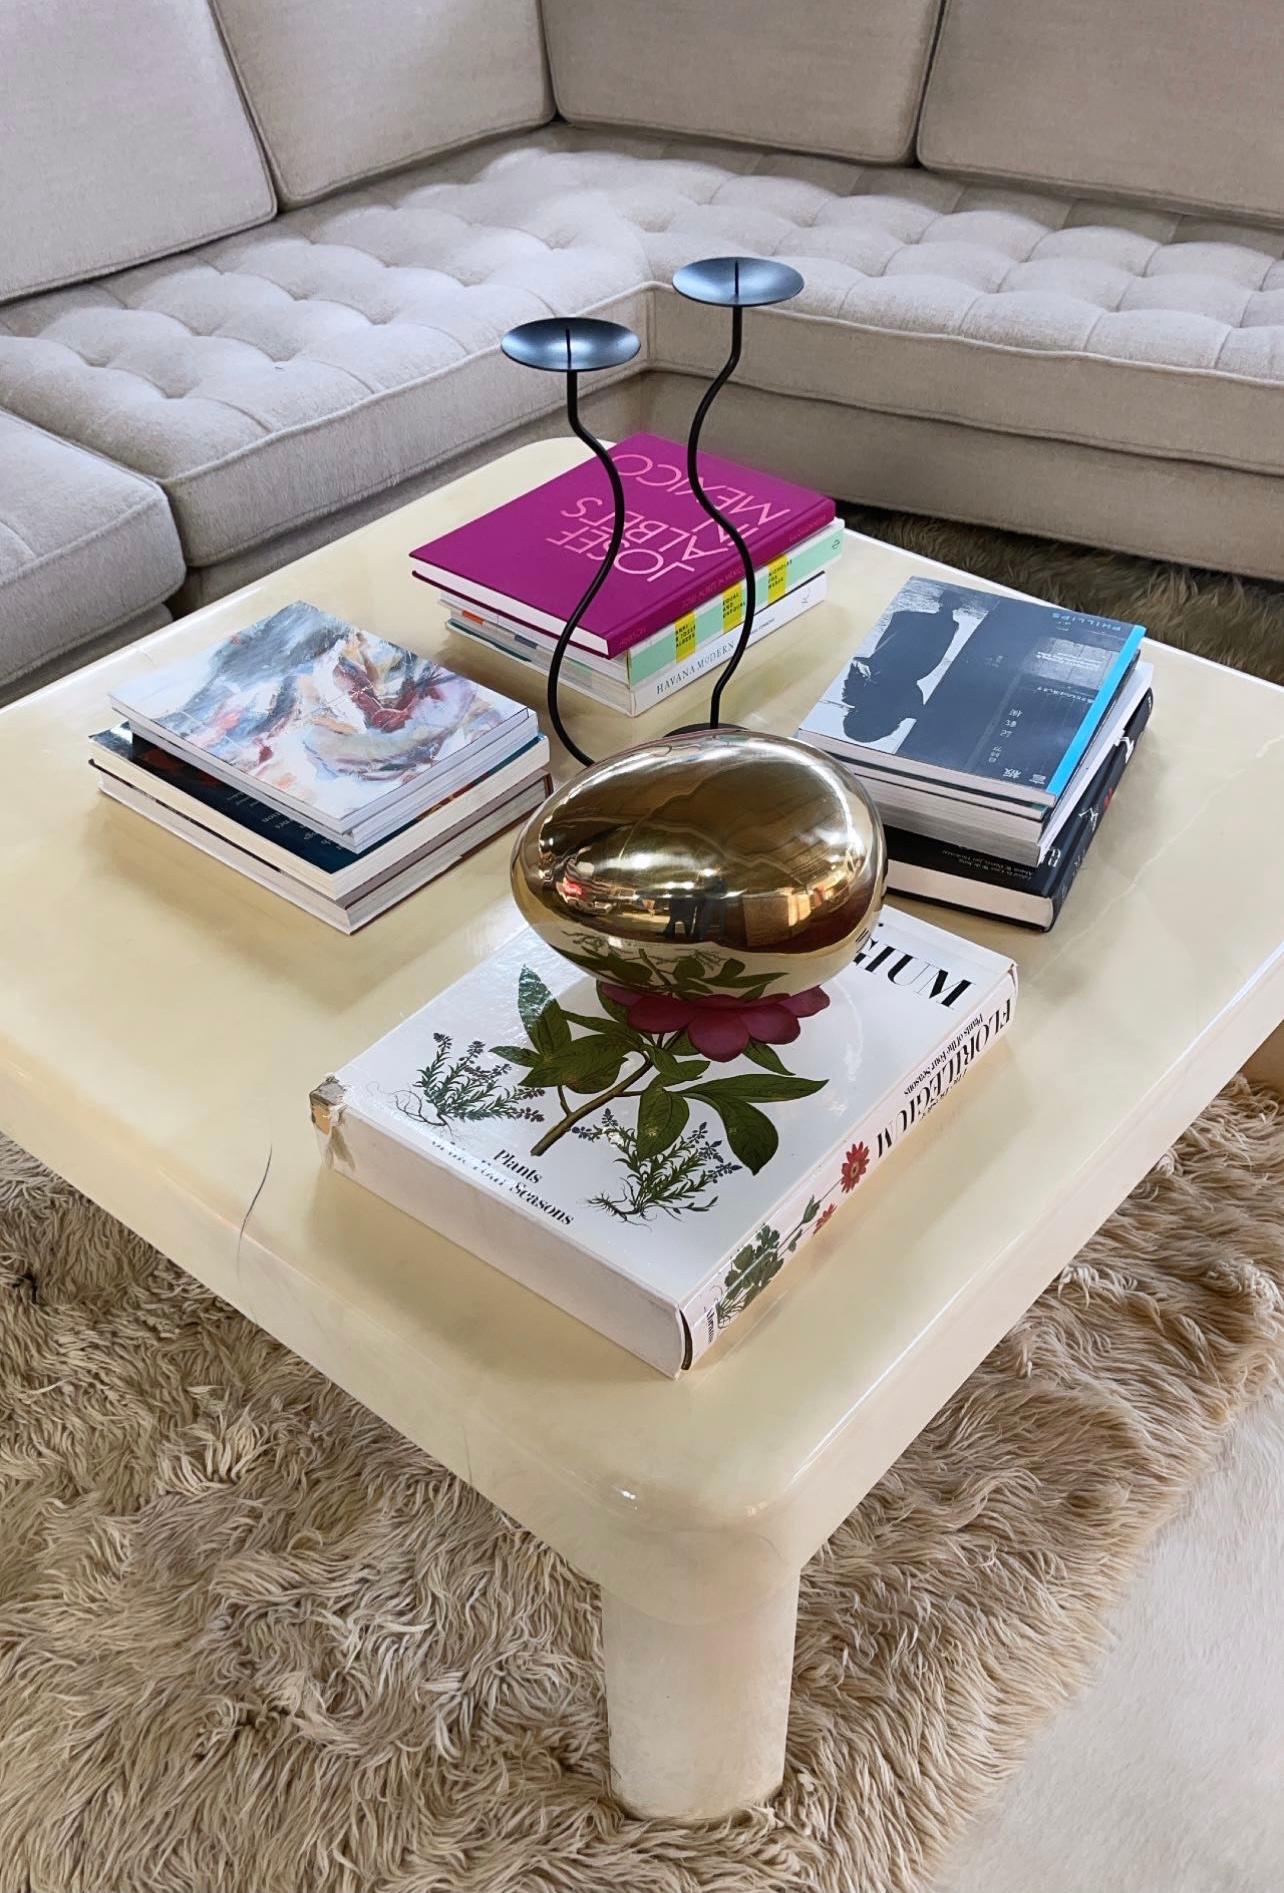 Karl Springer's furniture wrapped in lacquered skins—goat, lizard, alligator, shagreen, python, and even frog—were his most distinct pieces. This beautiful Springer coffee table is made of lacquered goatskin. The thick lacquer creates a very cool,